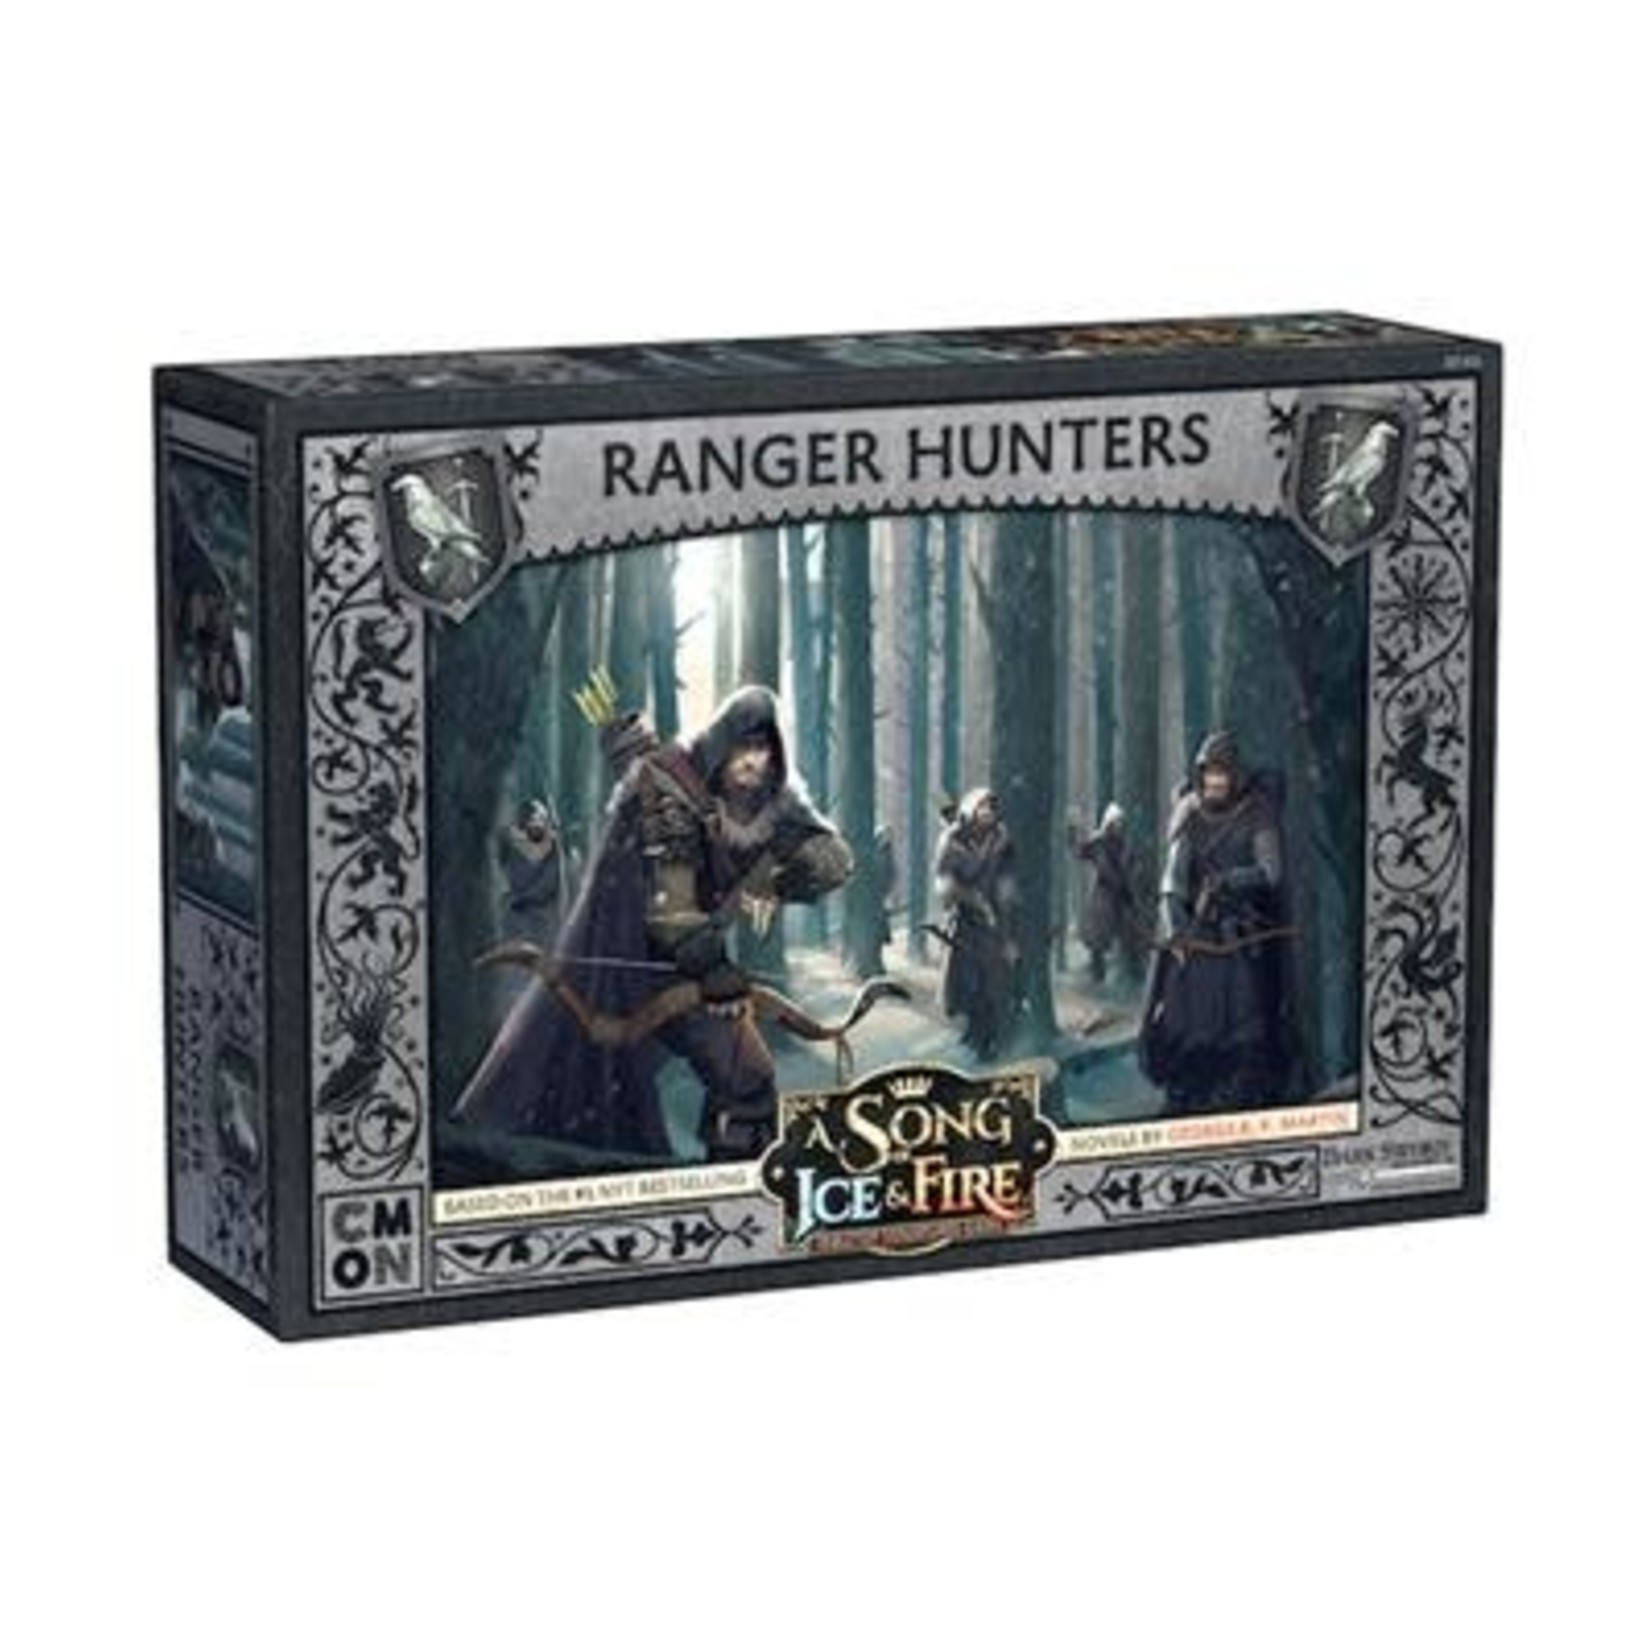 A Song of Fire and Ice: Ranger Hunters